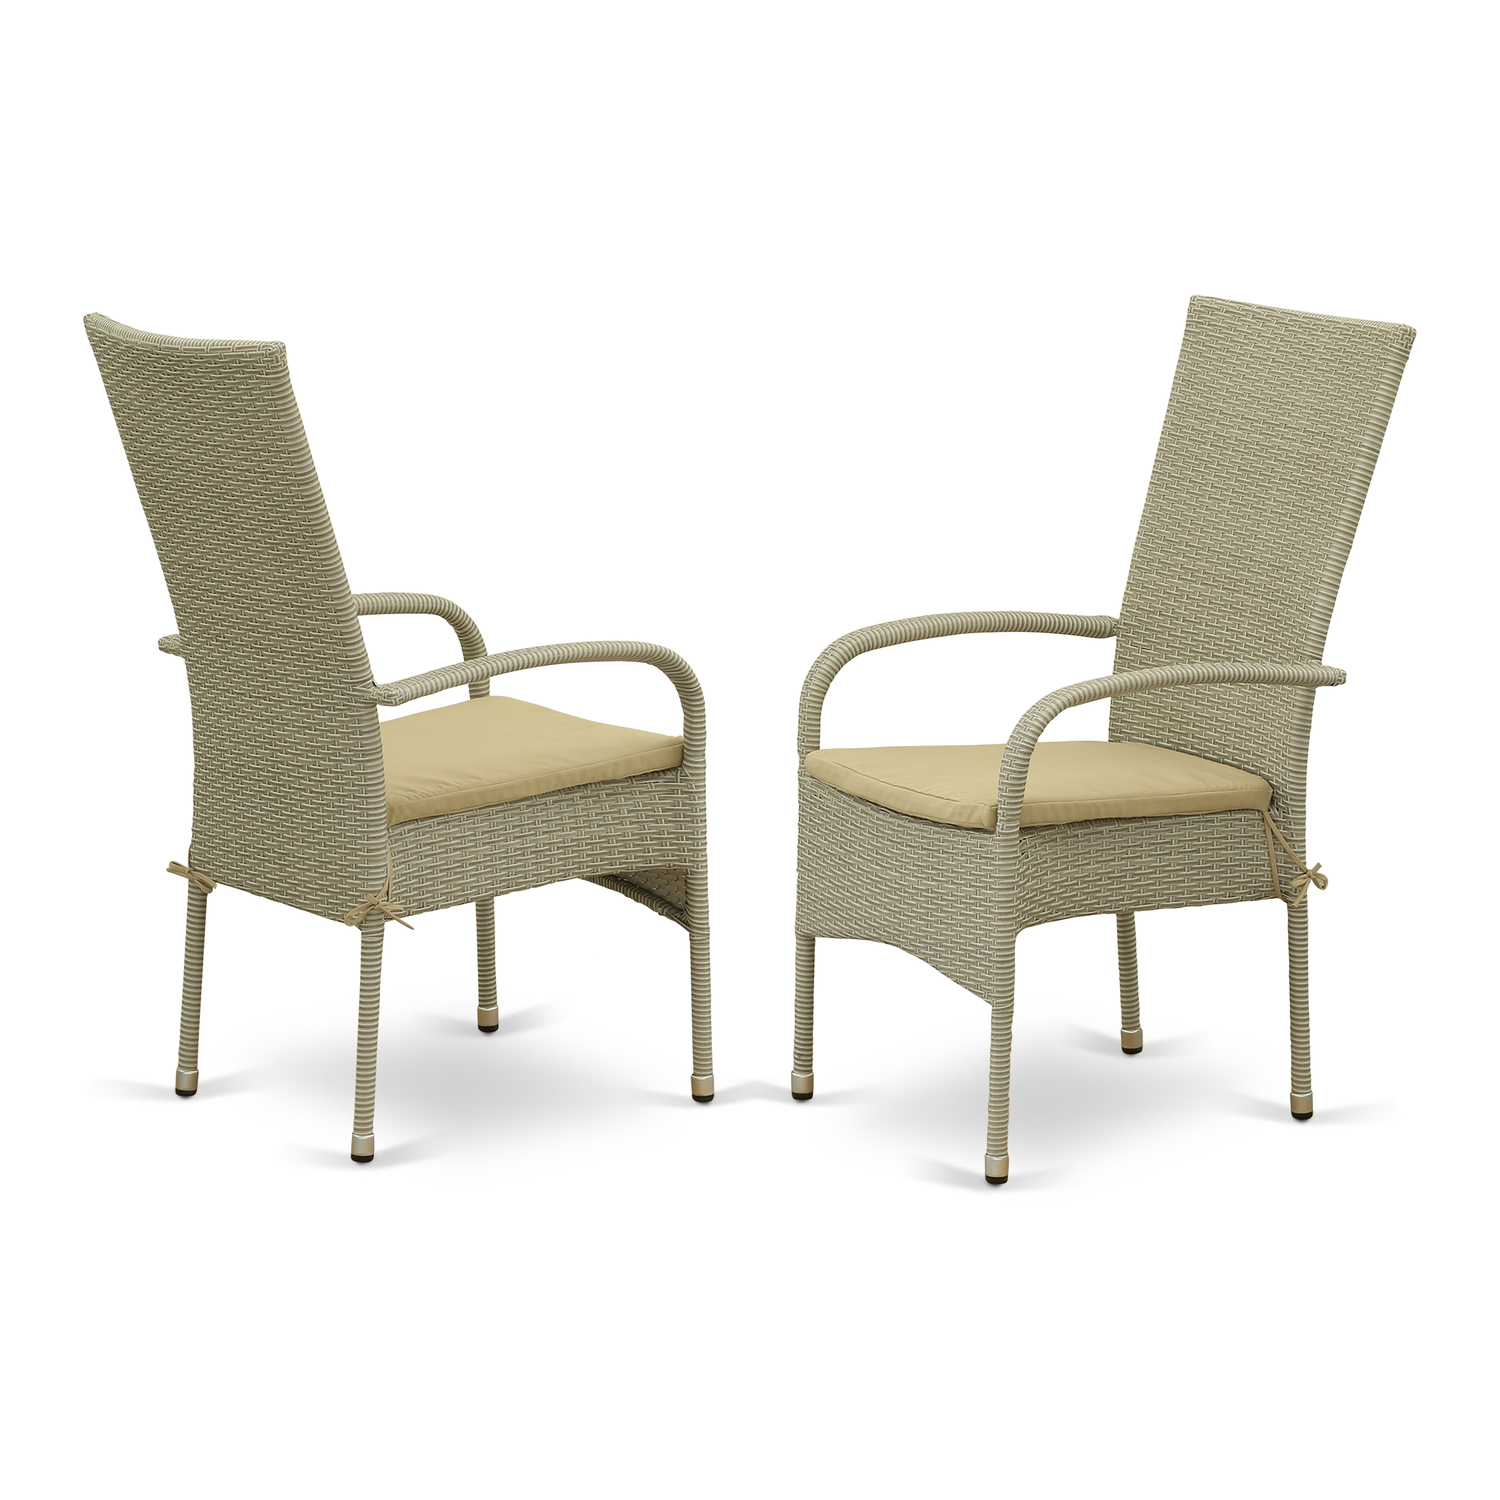 Set of 2 Chairs OSLC103A OSLO PATIO CHAIR WITH CUSHION, NATURAL LINEN WICKER, AND BEIGE CUSHION - image 2 of 3